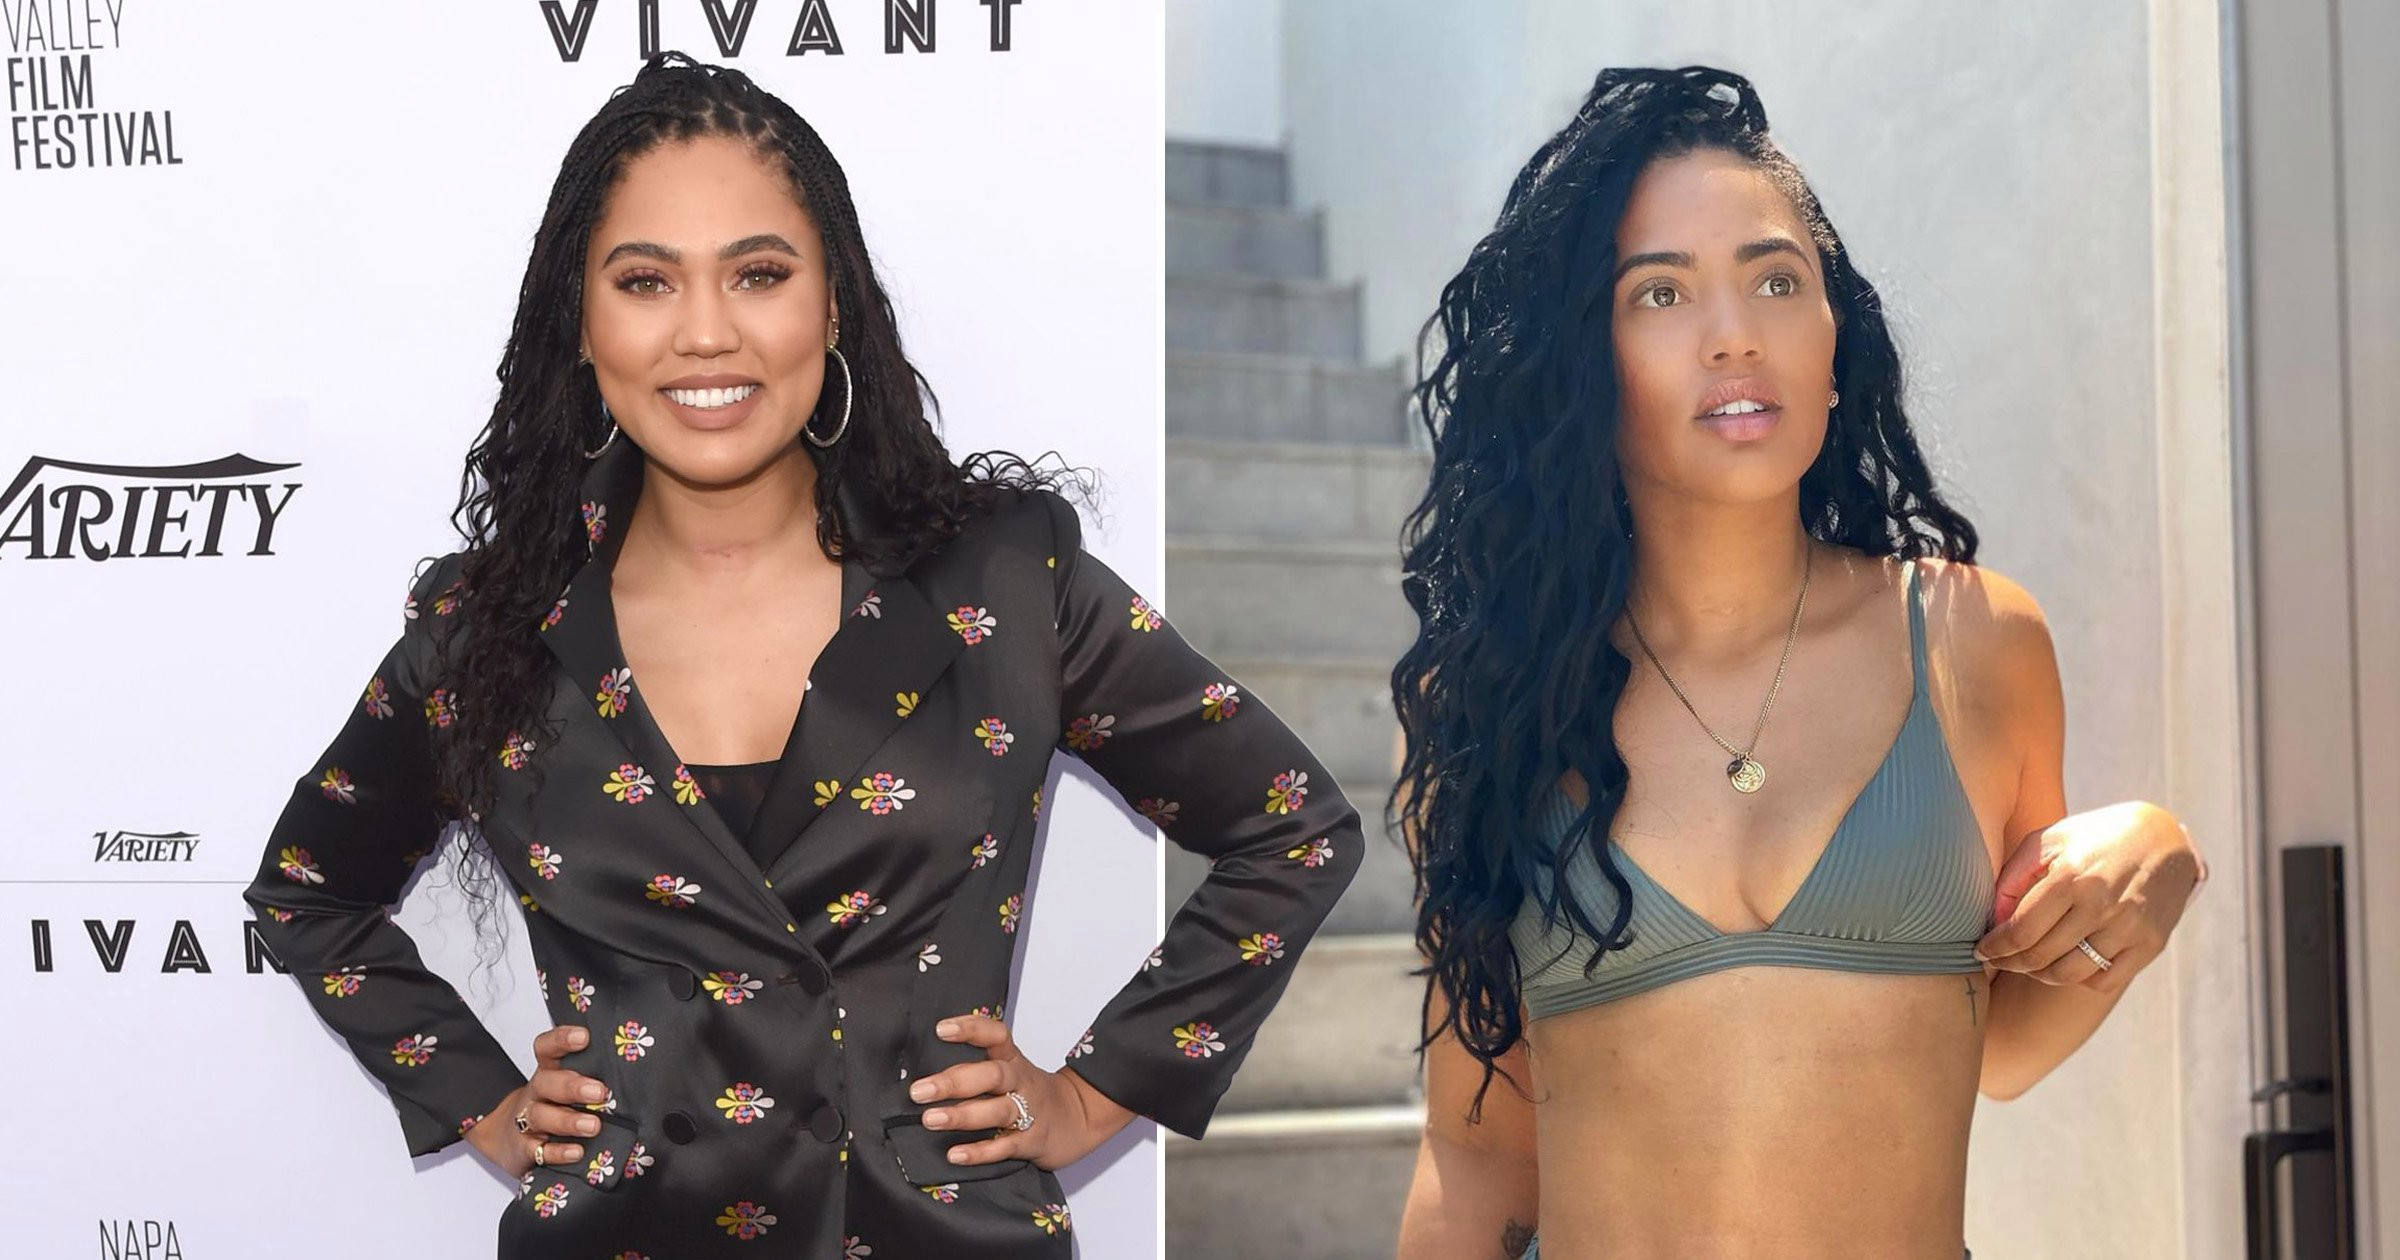 Ayesha Curry fires back after being called a hypocrite over nude photo